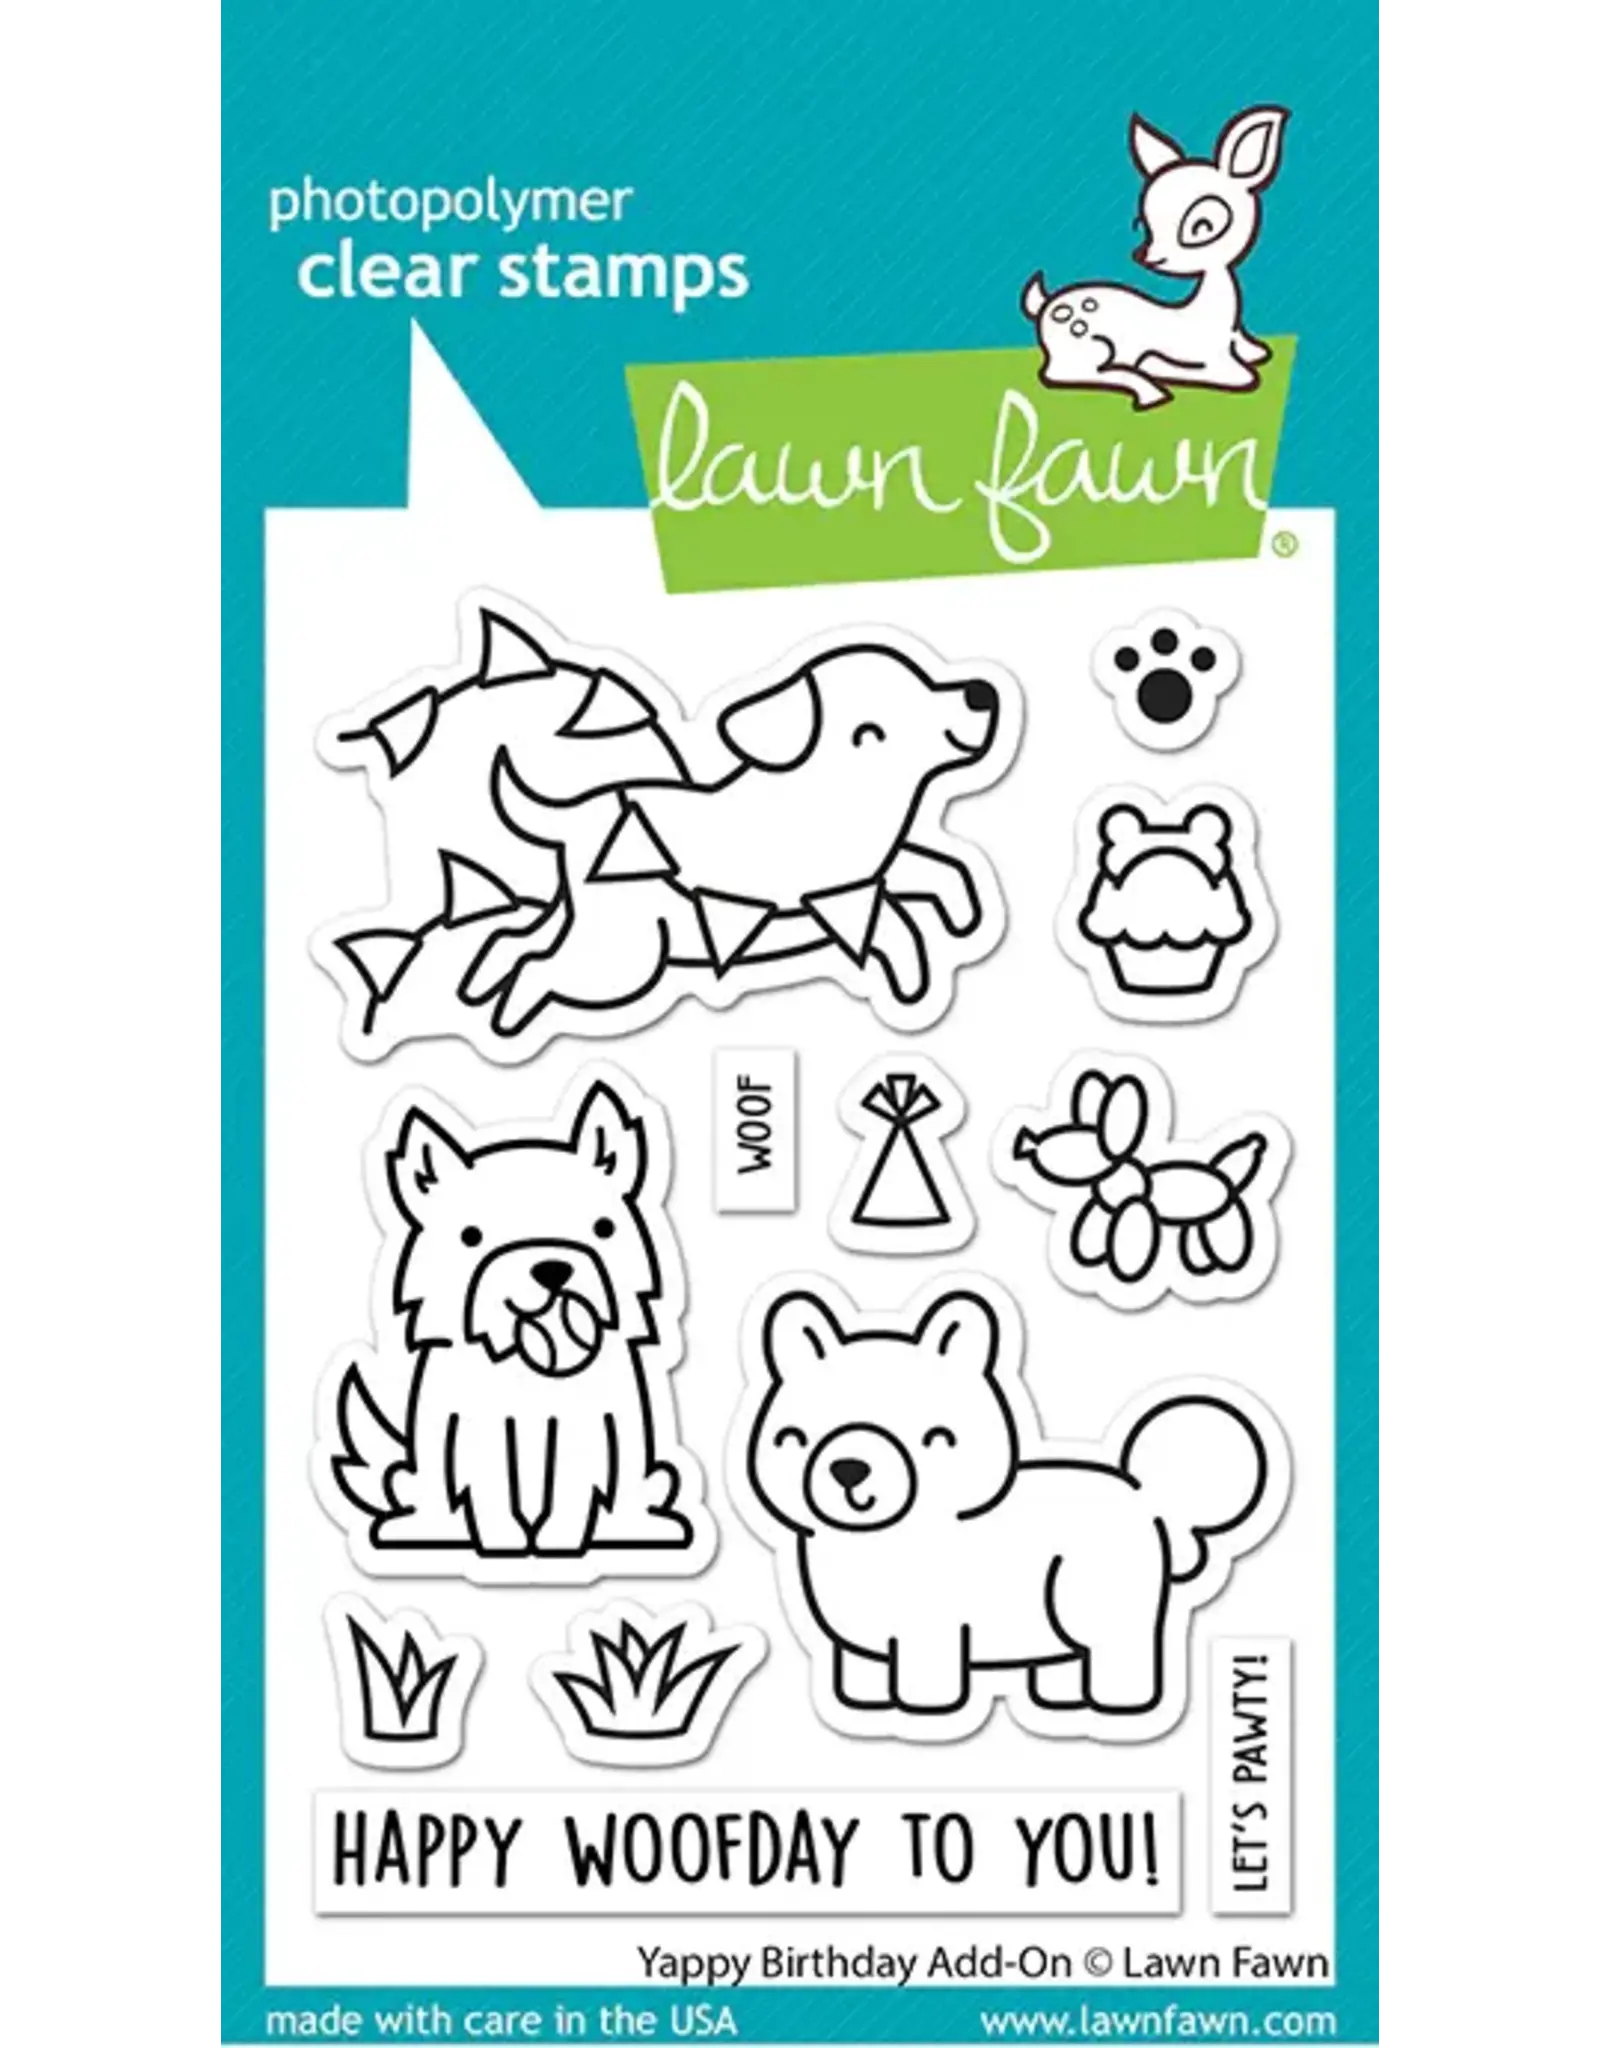 LAWN FAWN LAWN FAWN YAPPY BIRTHDAY ADD-ON CLEAR STAMP AND DIE SET